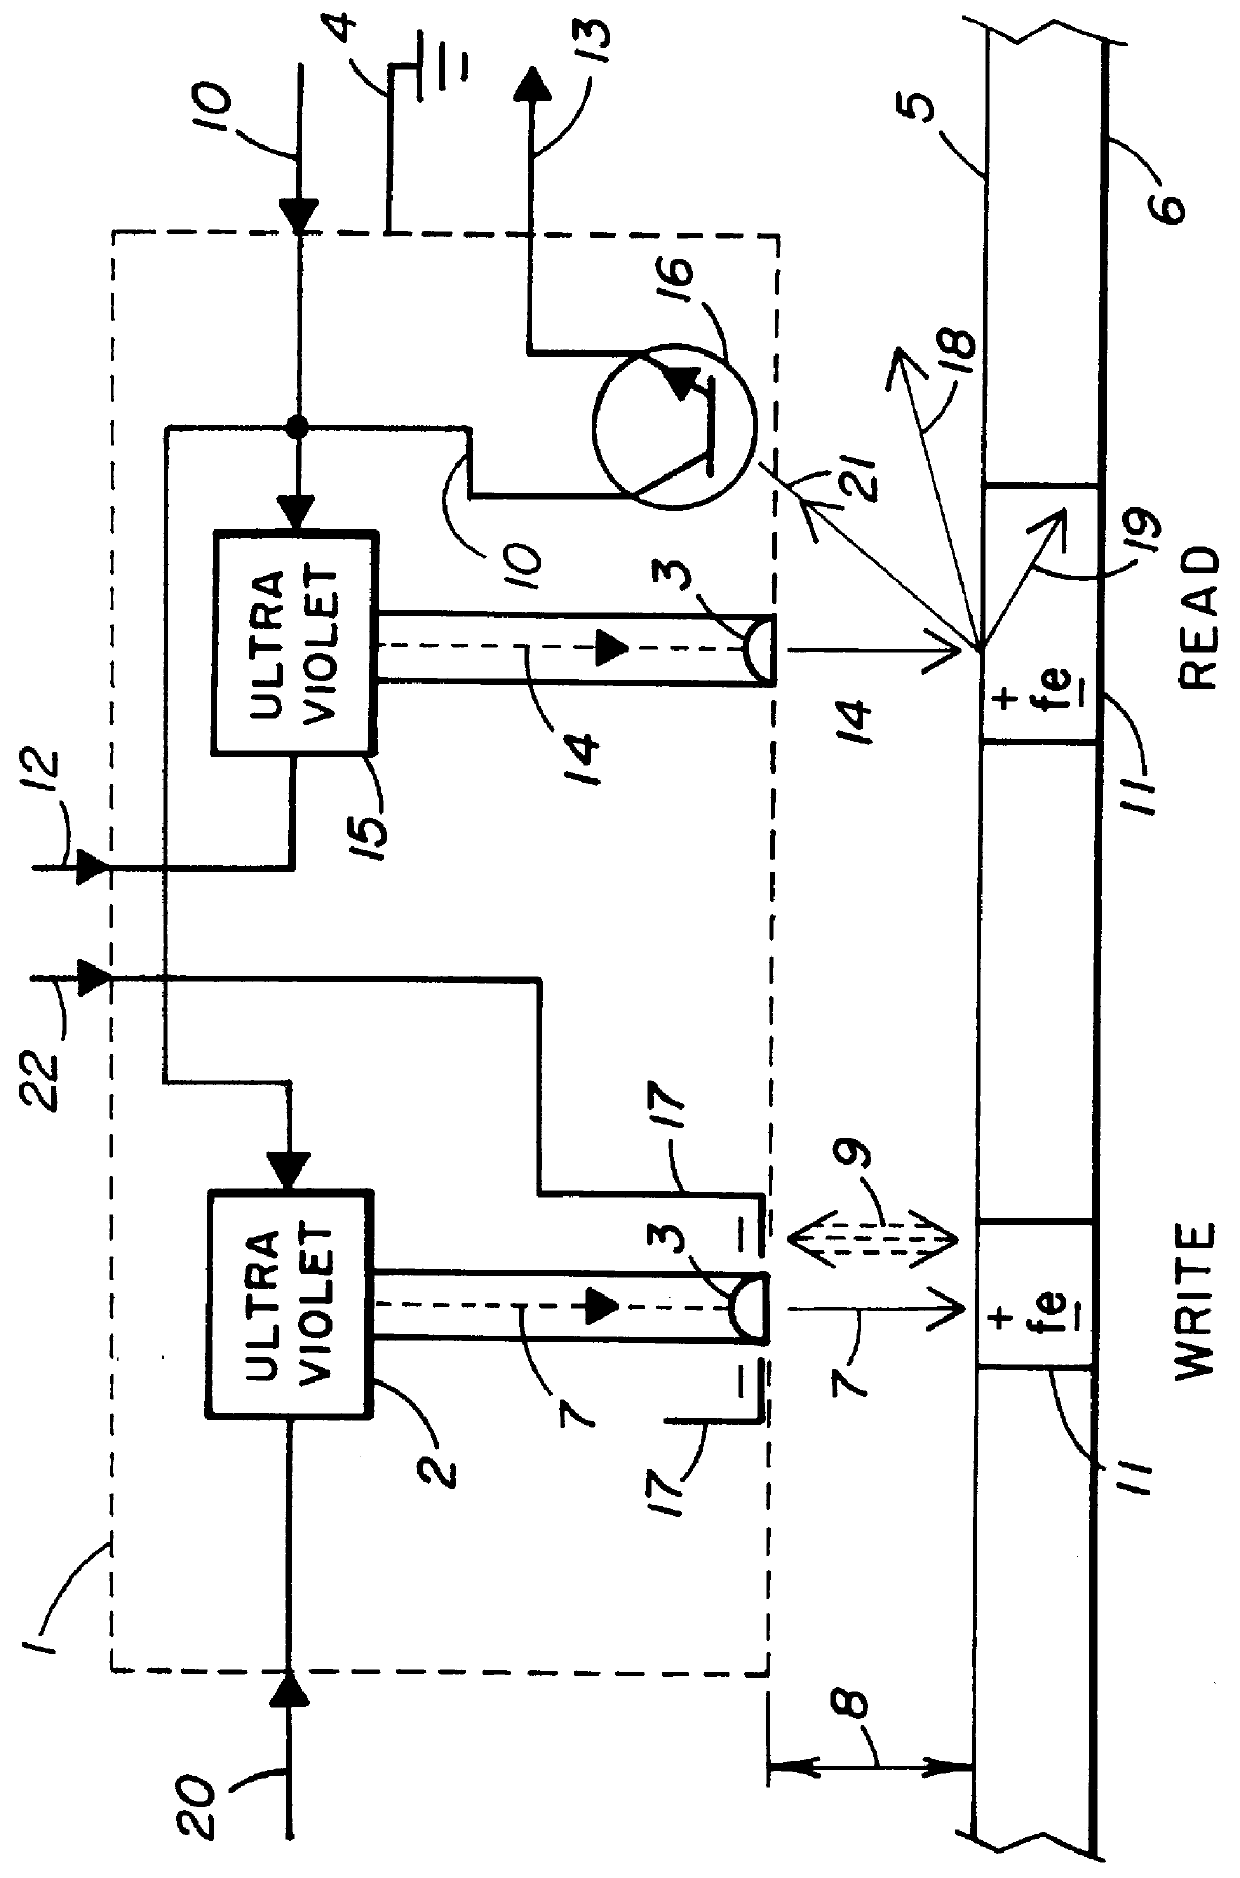 Integrated read/write head for ferroelectric optical storage